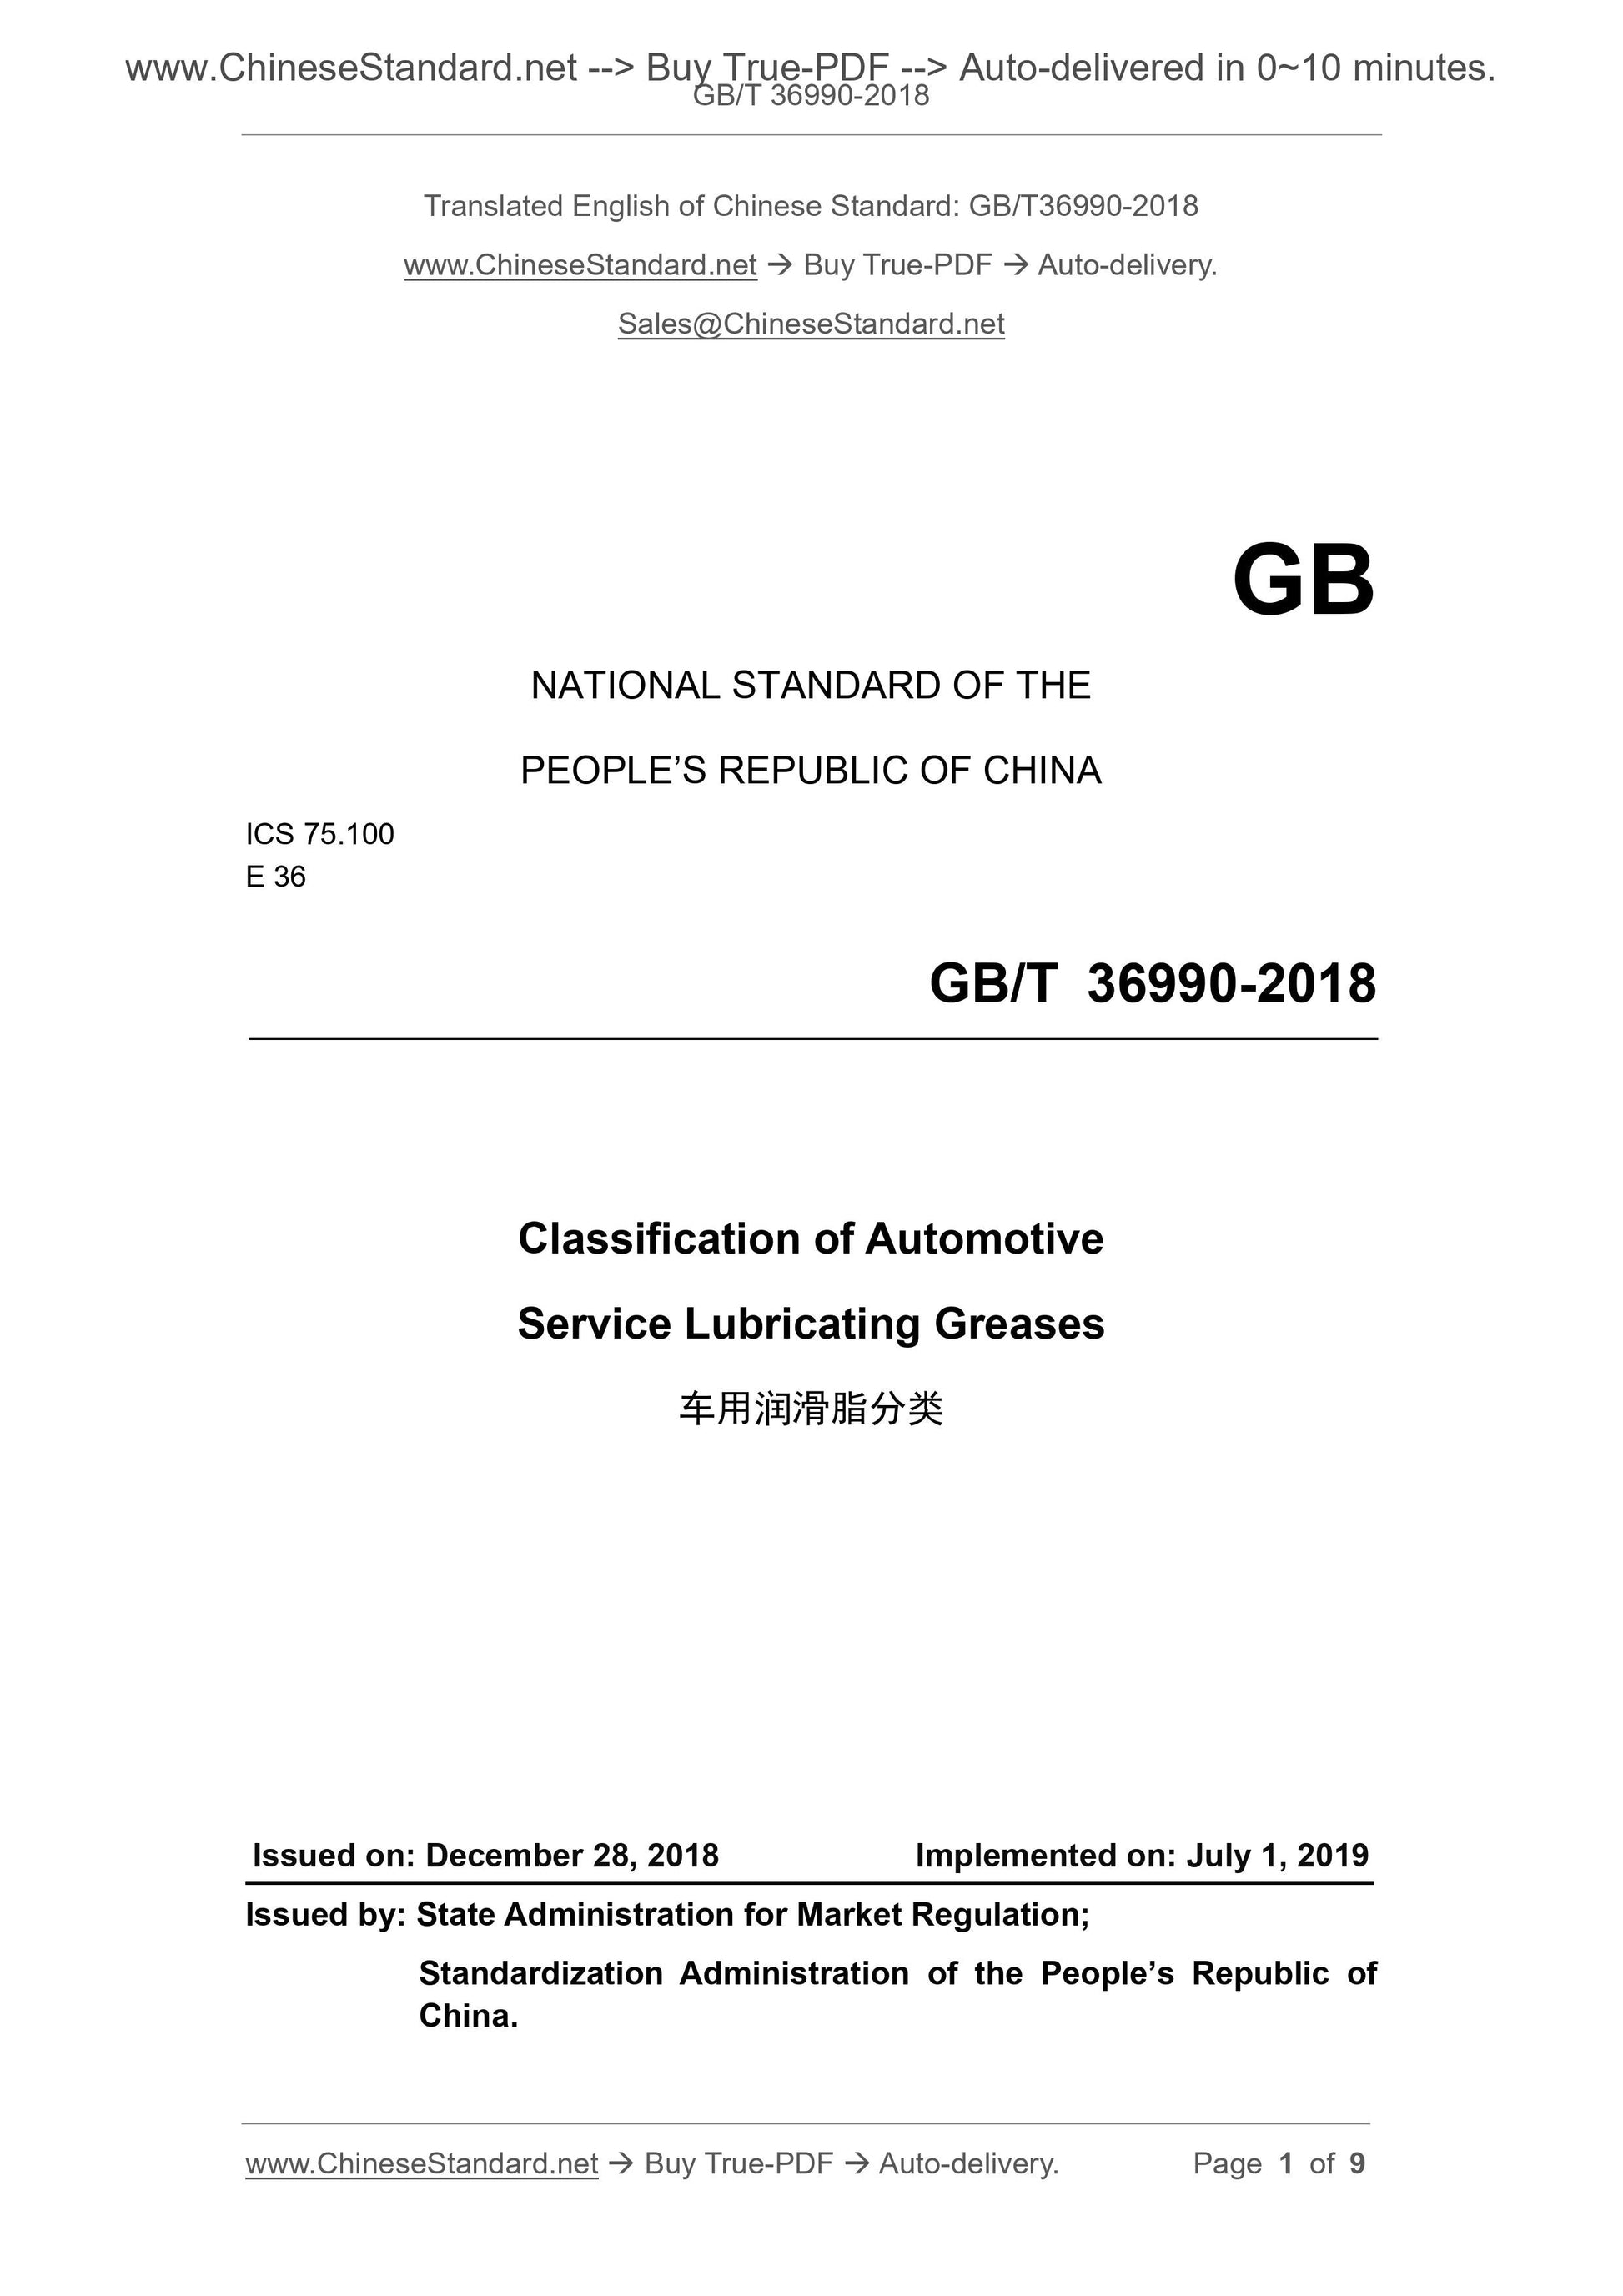 GB/T 36990-2018 Page 1